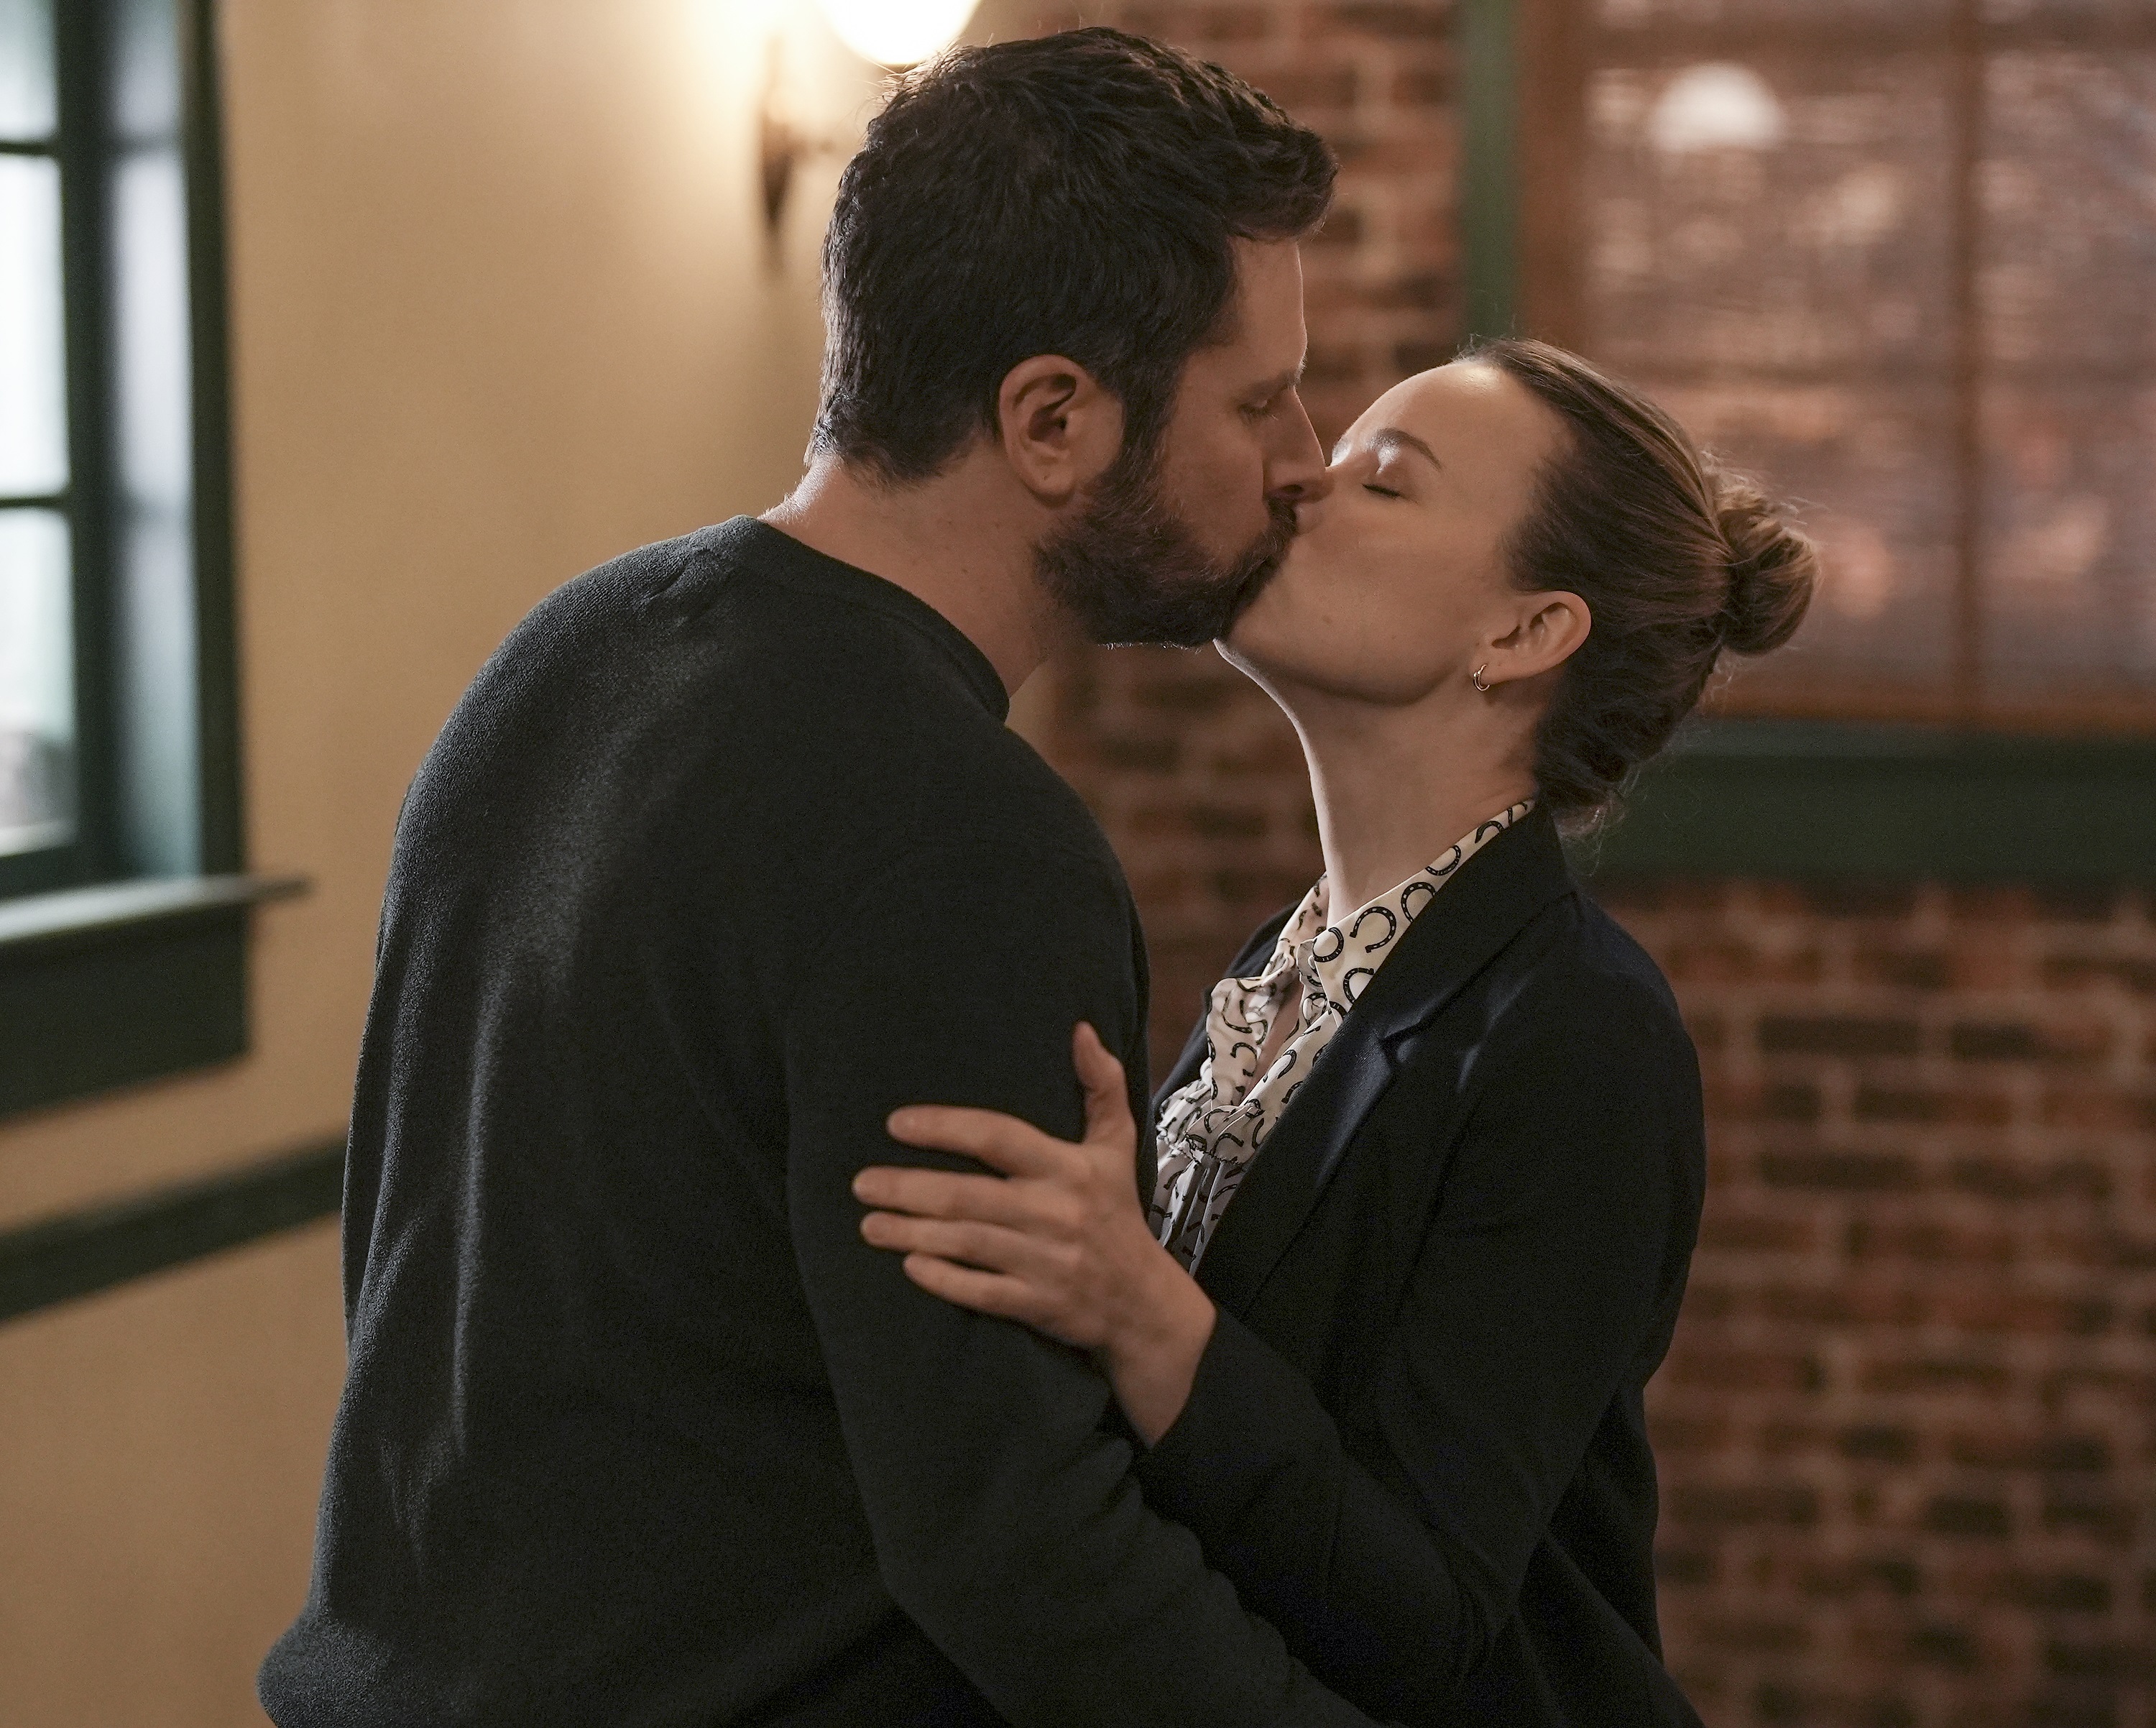 'A Million Little Things' cast members James Roday Rodriguez as Gary and Allison Miller as Maggie kissing